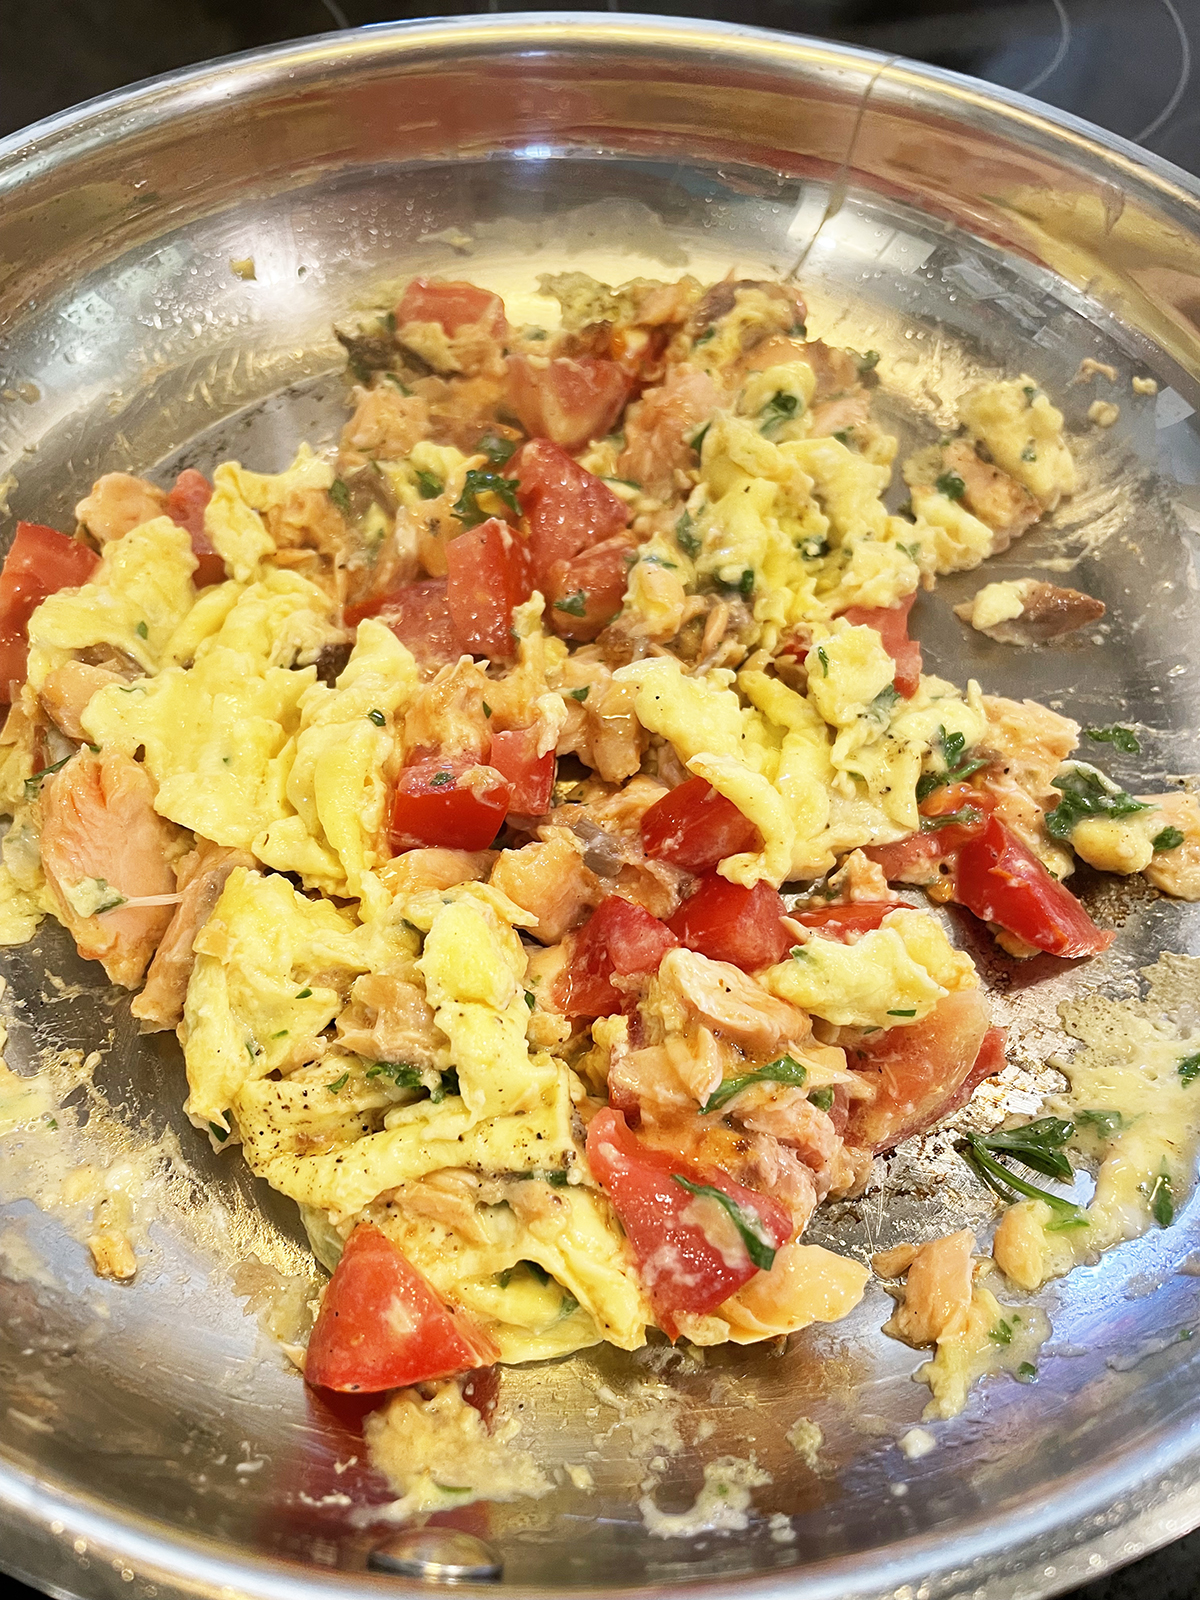 Egg scramble with salmon and tomatoes in a skillet.